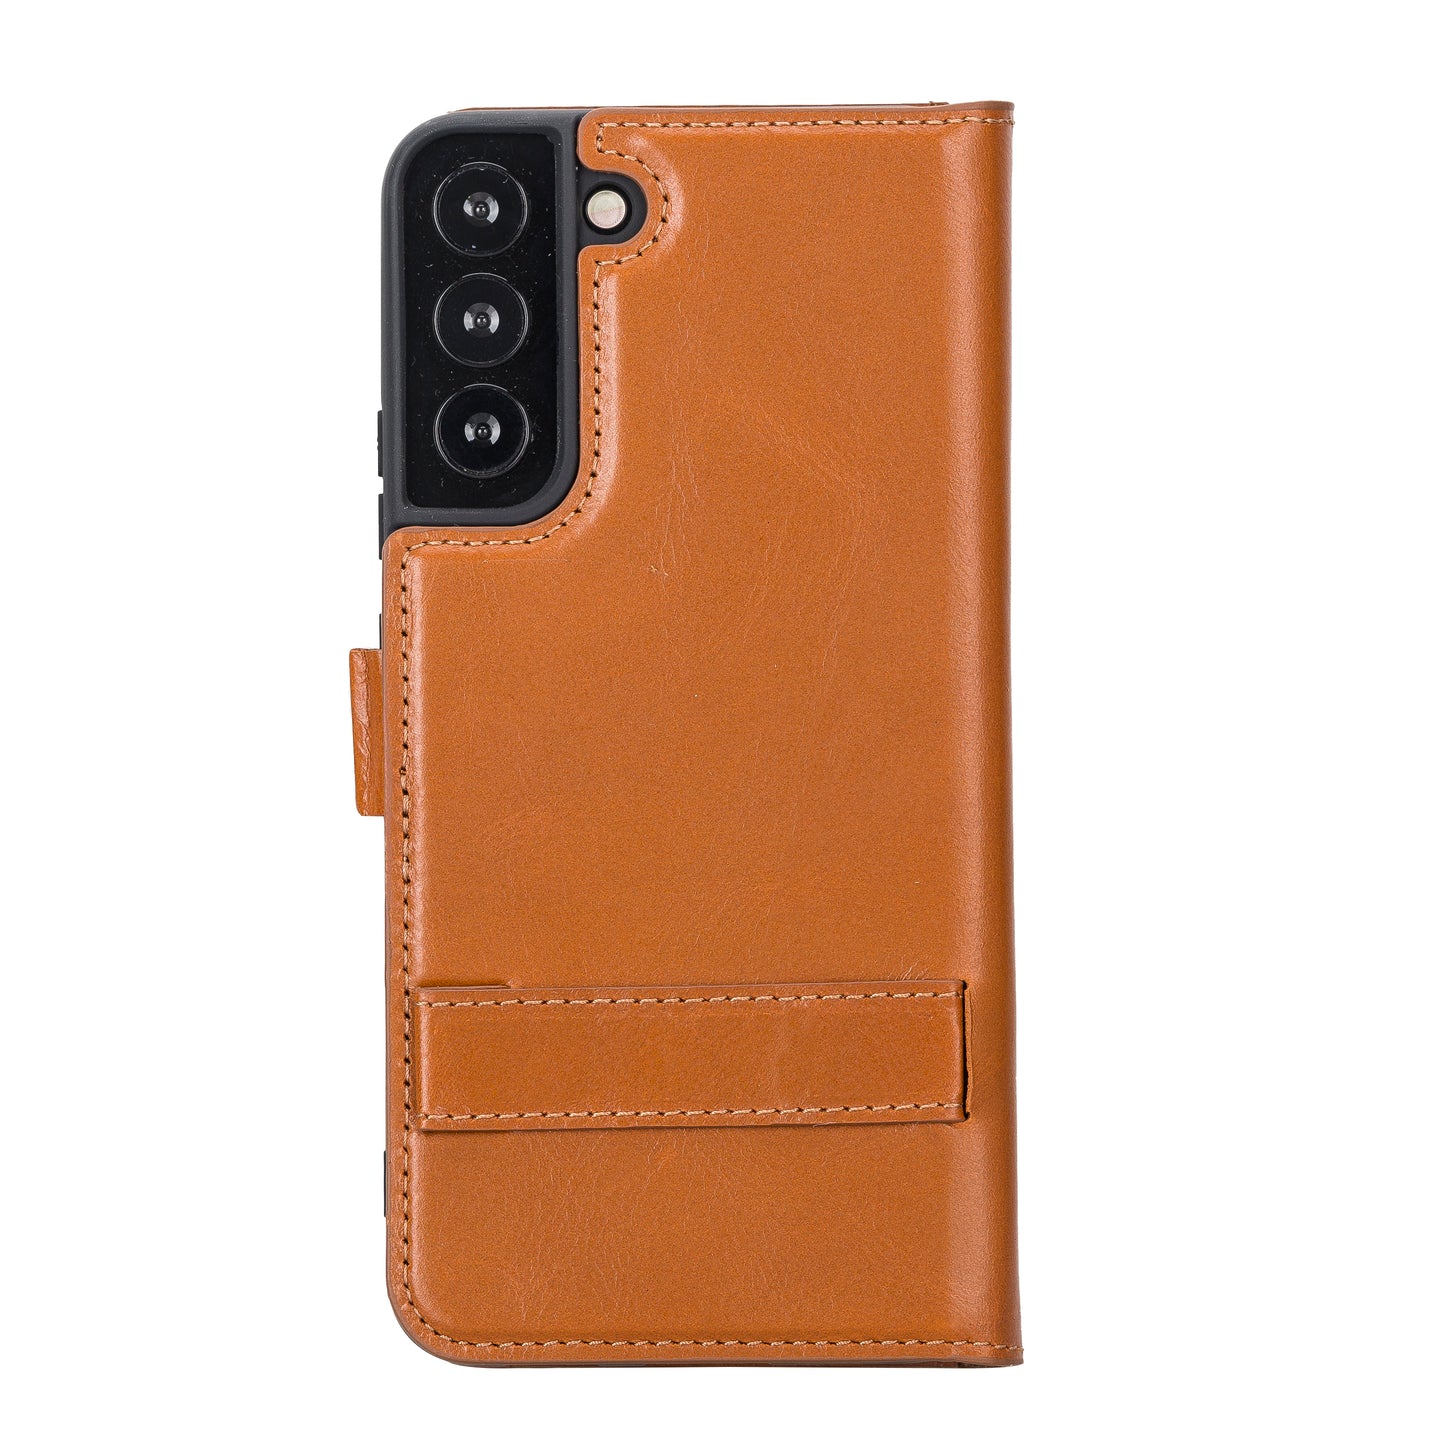 Samsung Galaxy S22 Plus (6.6") Leather Wallet Case - Brown